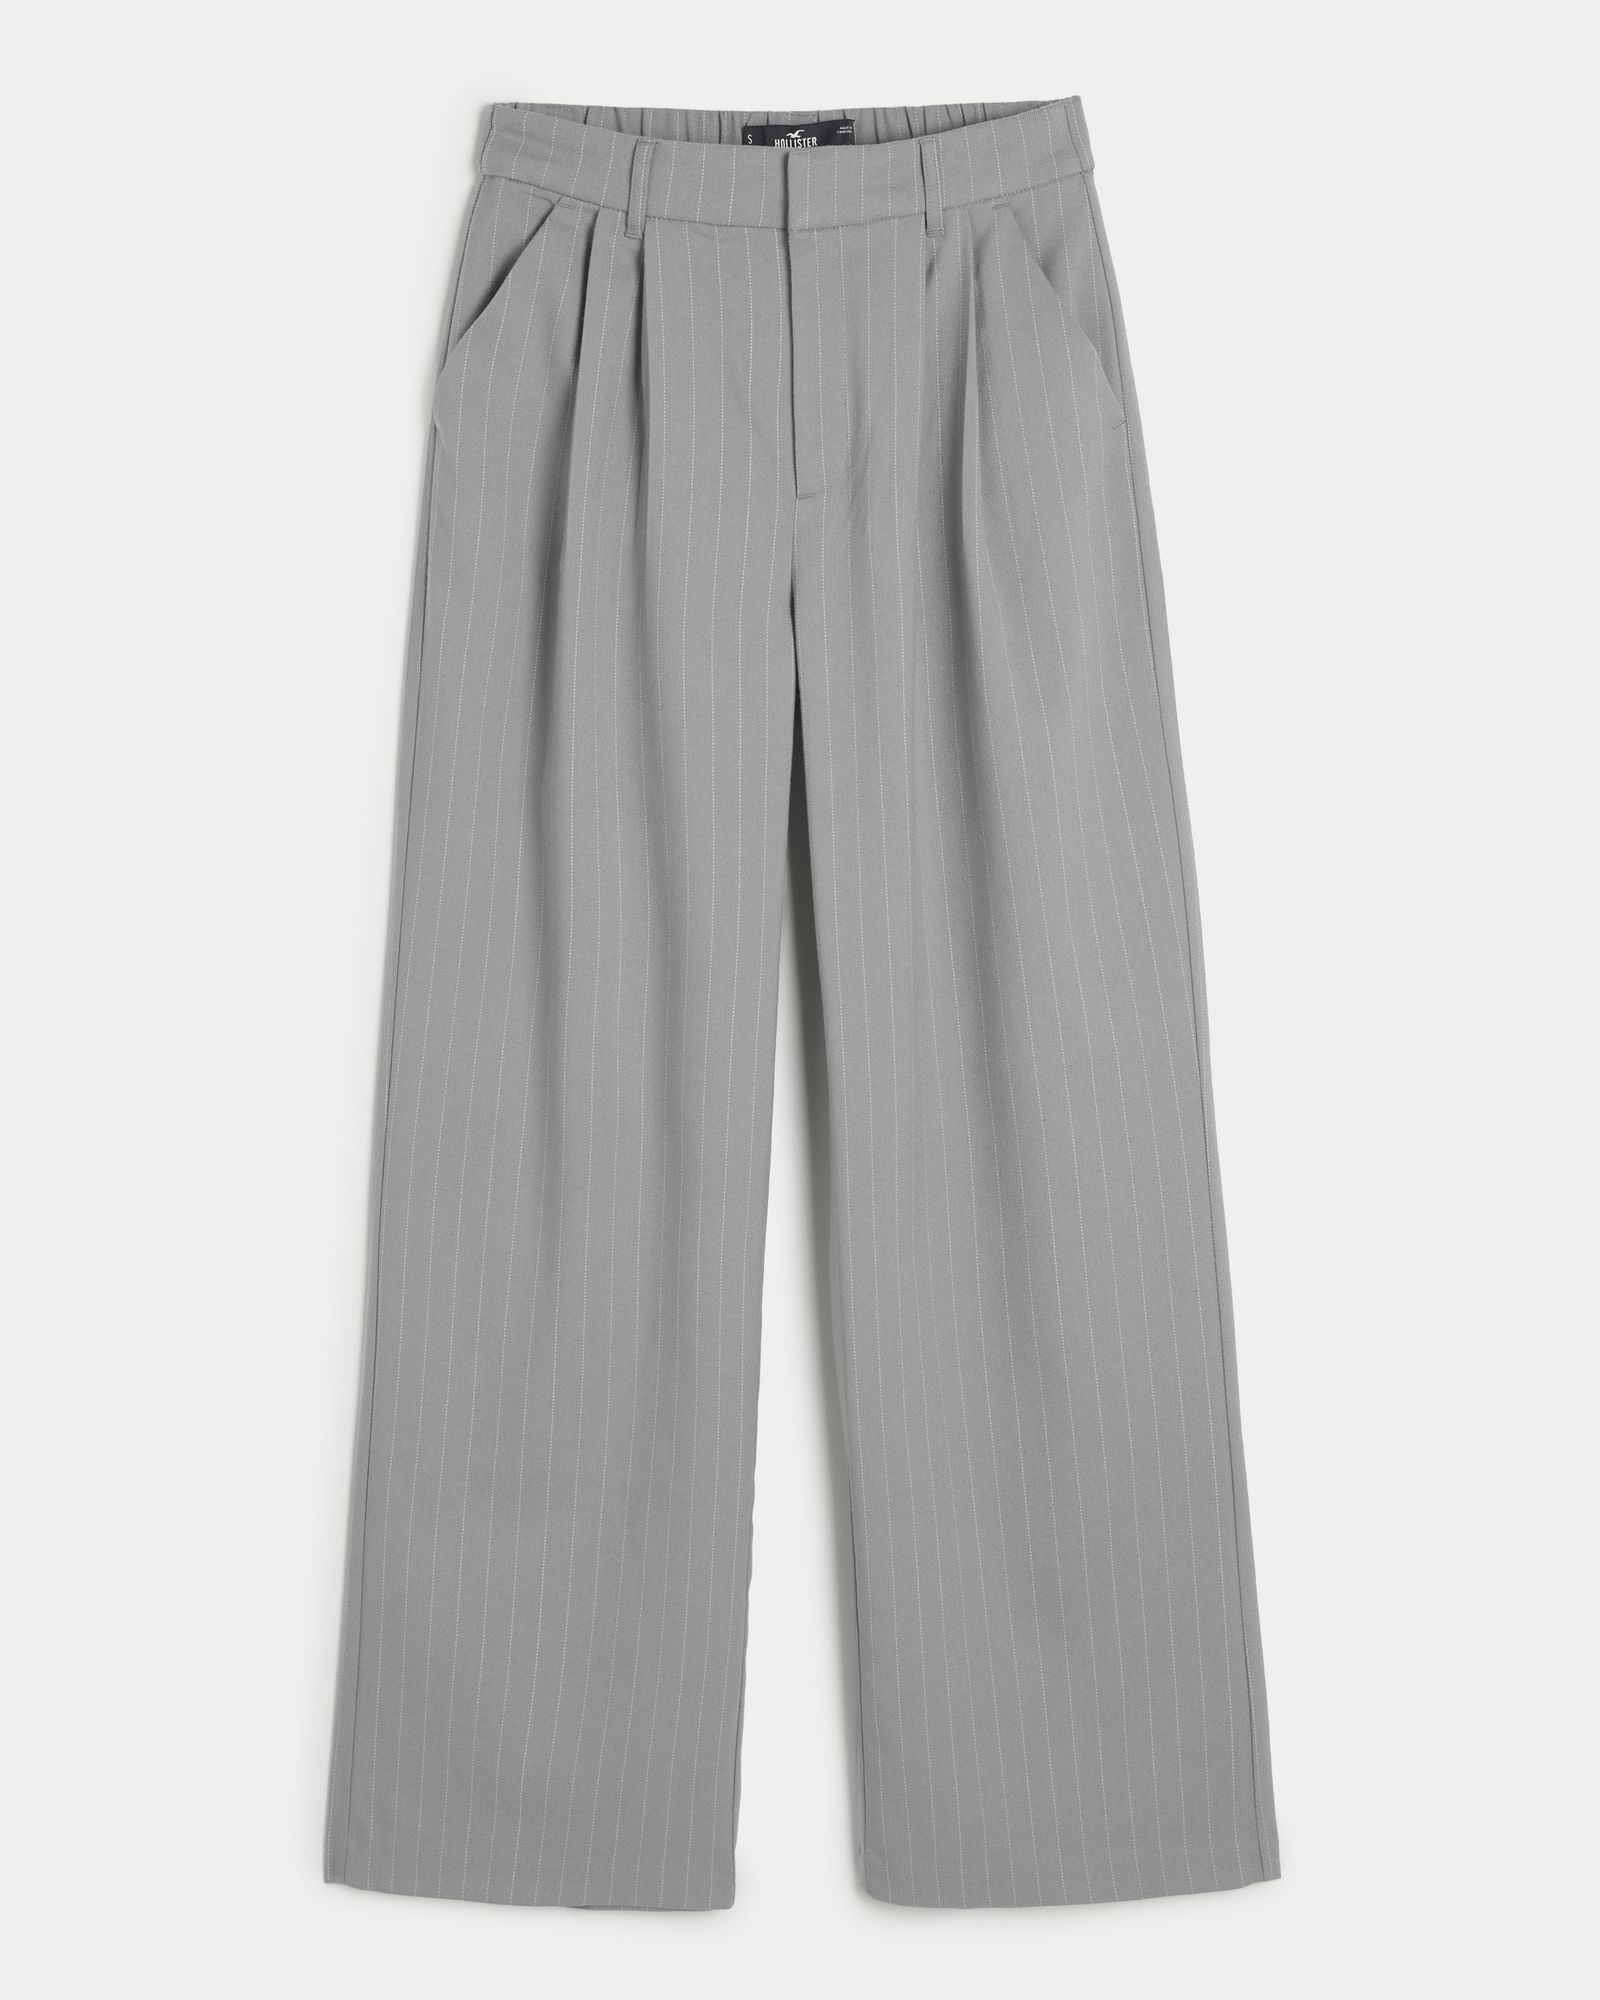 Hollister Ultra High Rise Plaid Pants Gray Size XS - $22 (51% Off Retail) -  From Aikaterina